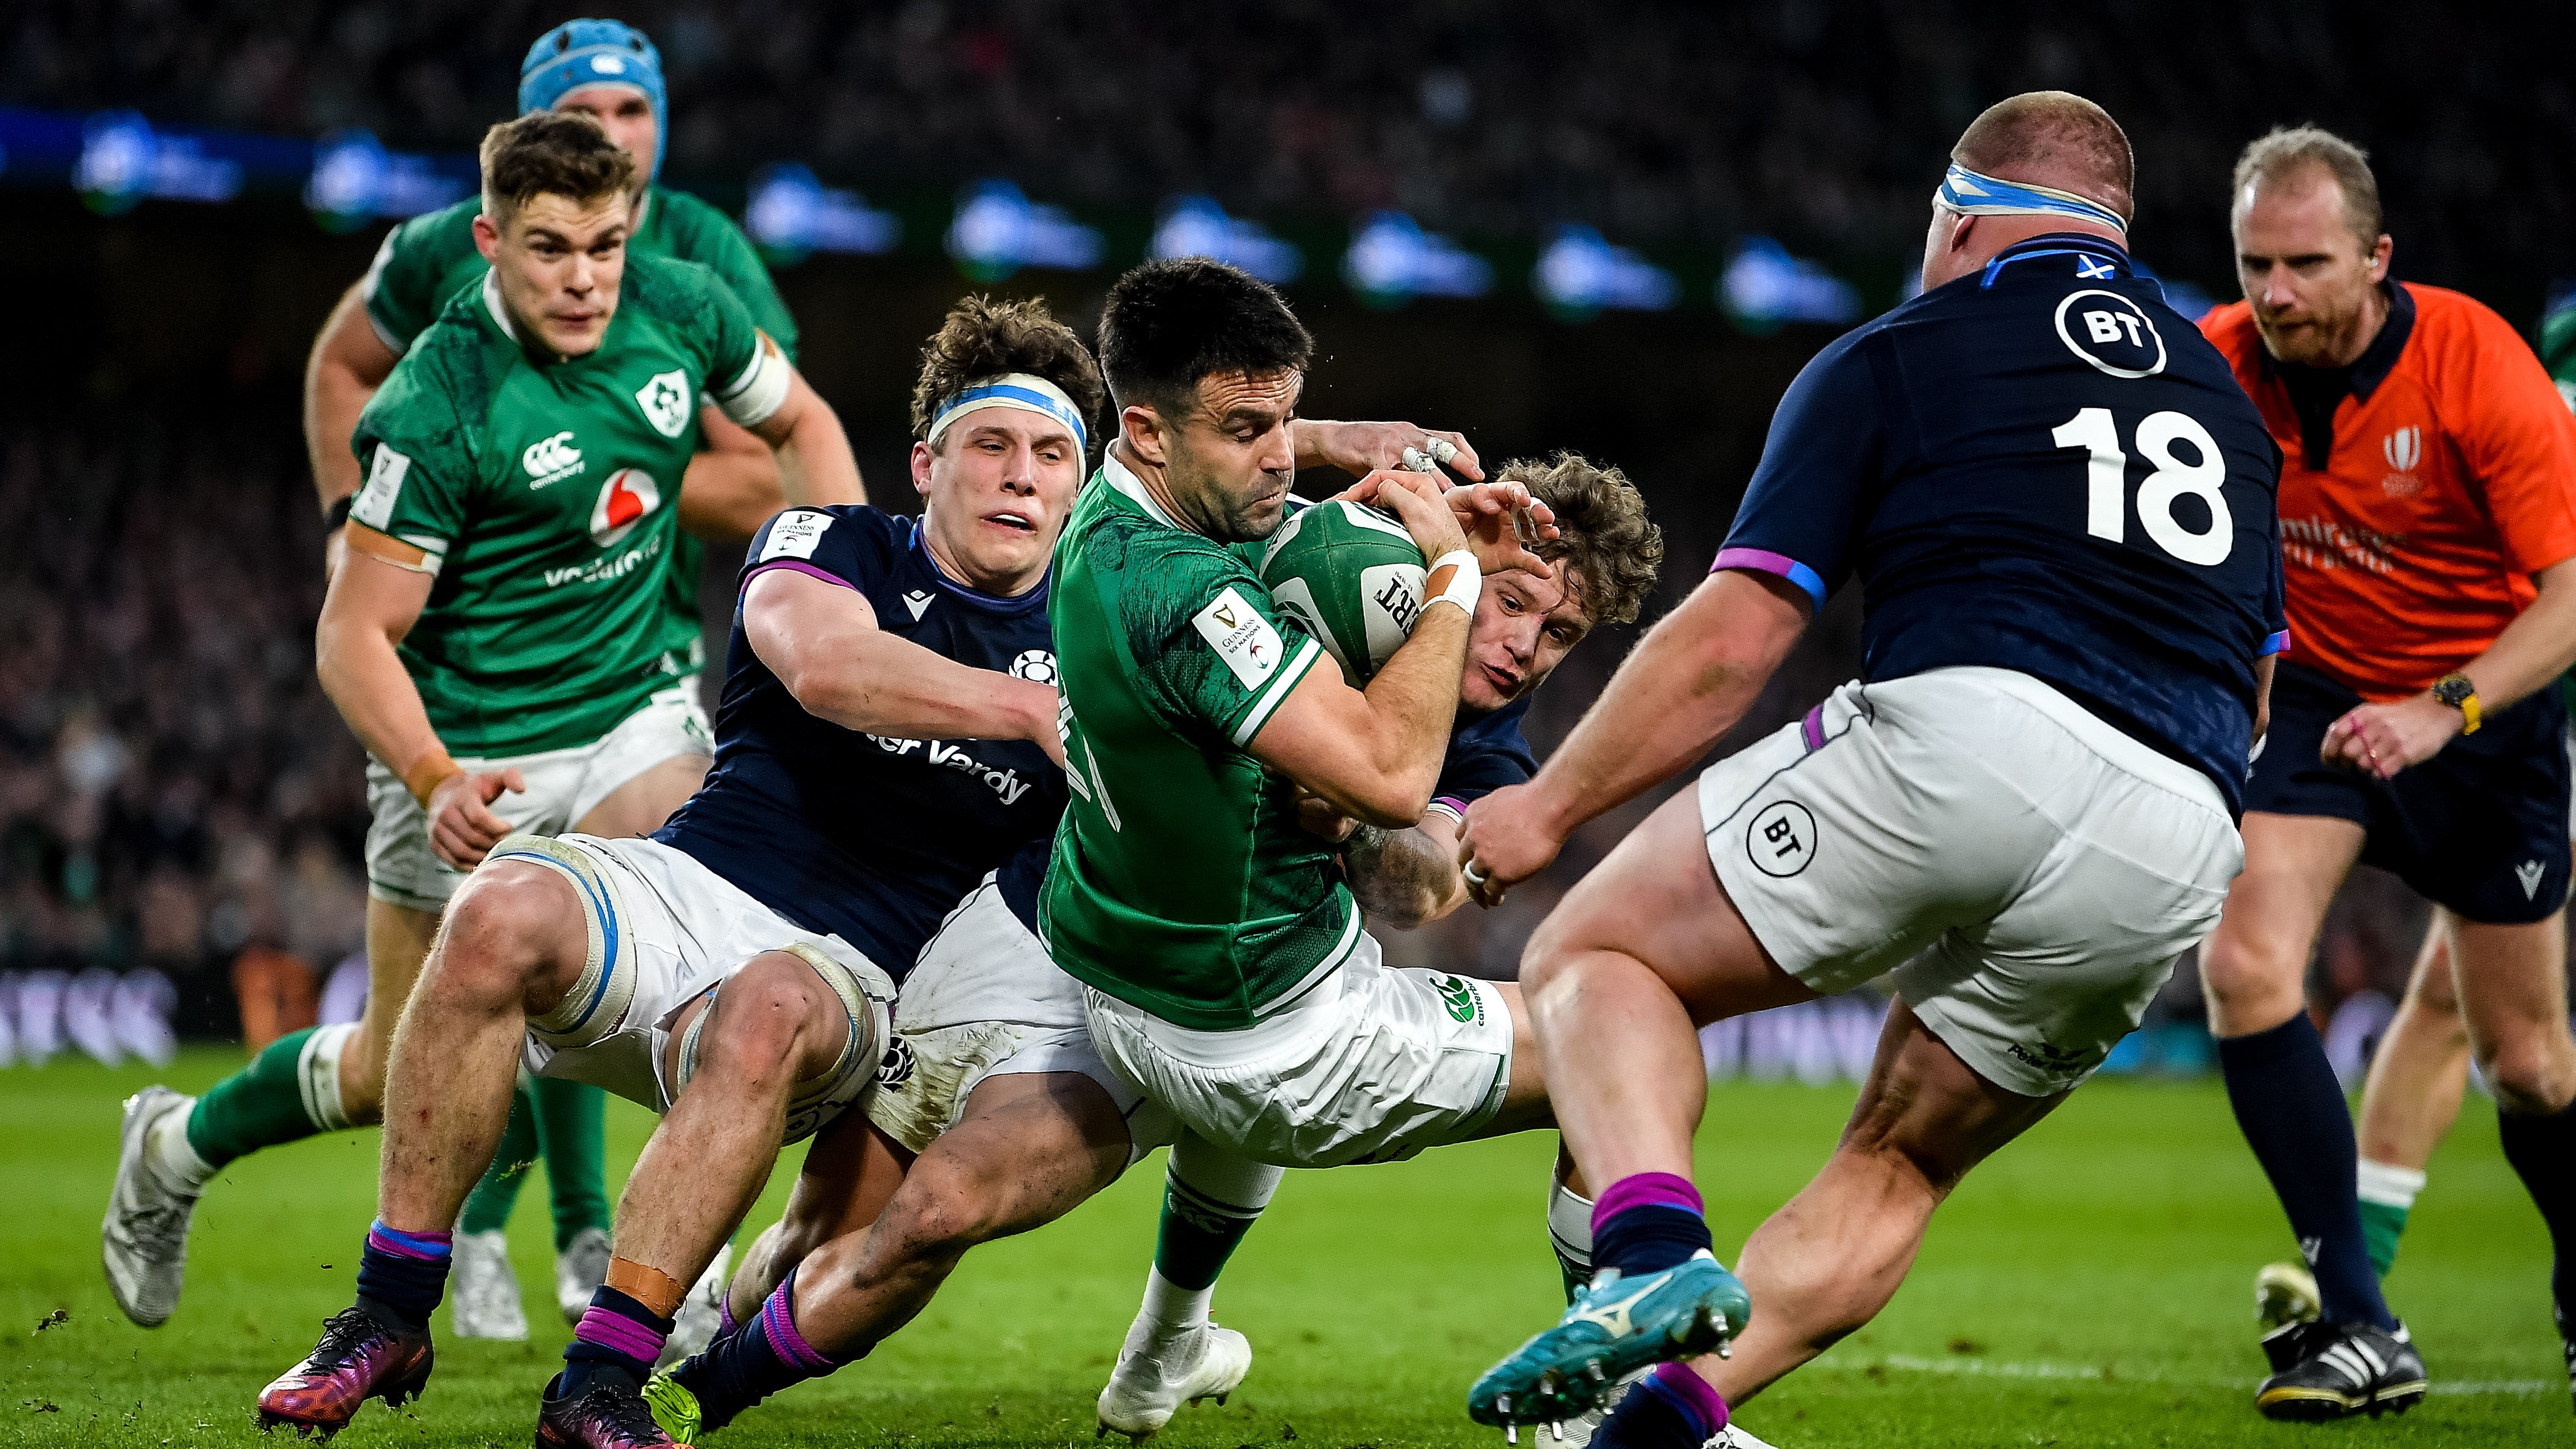 rugby online games free six nations